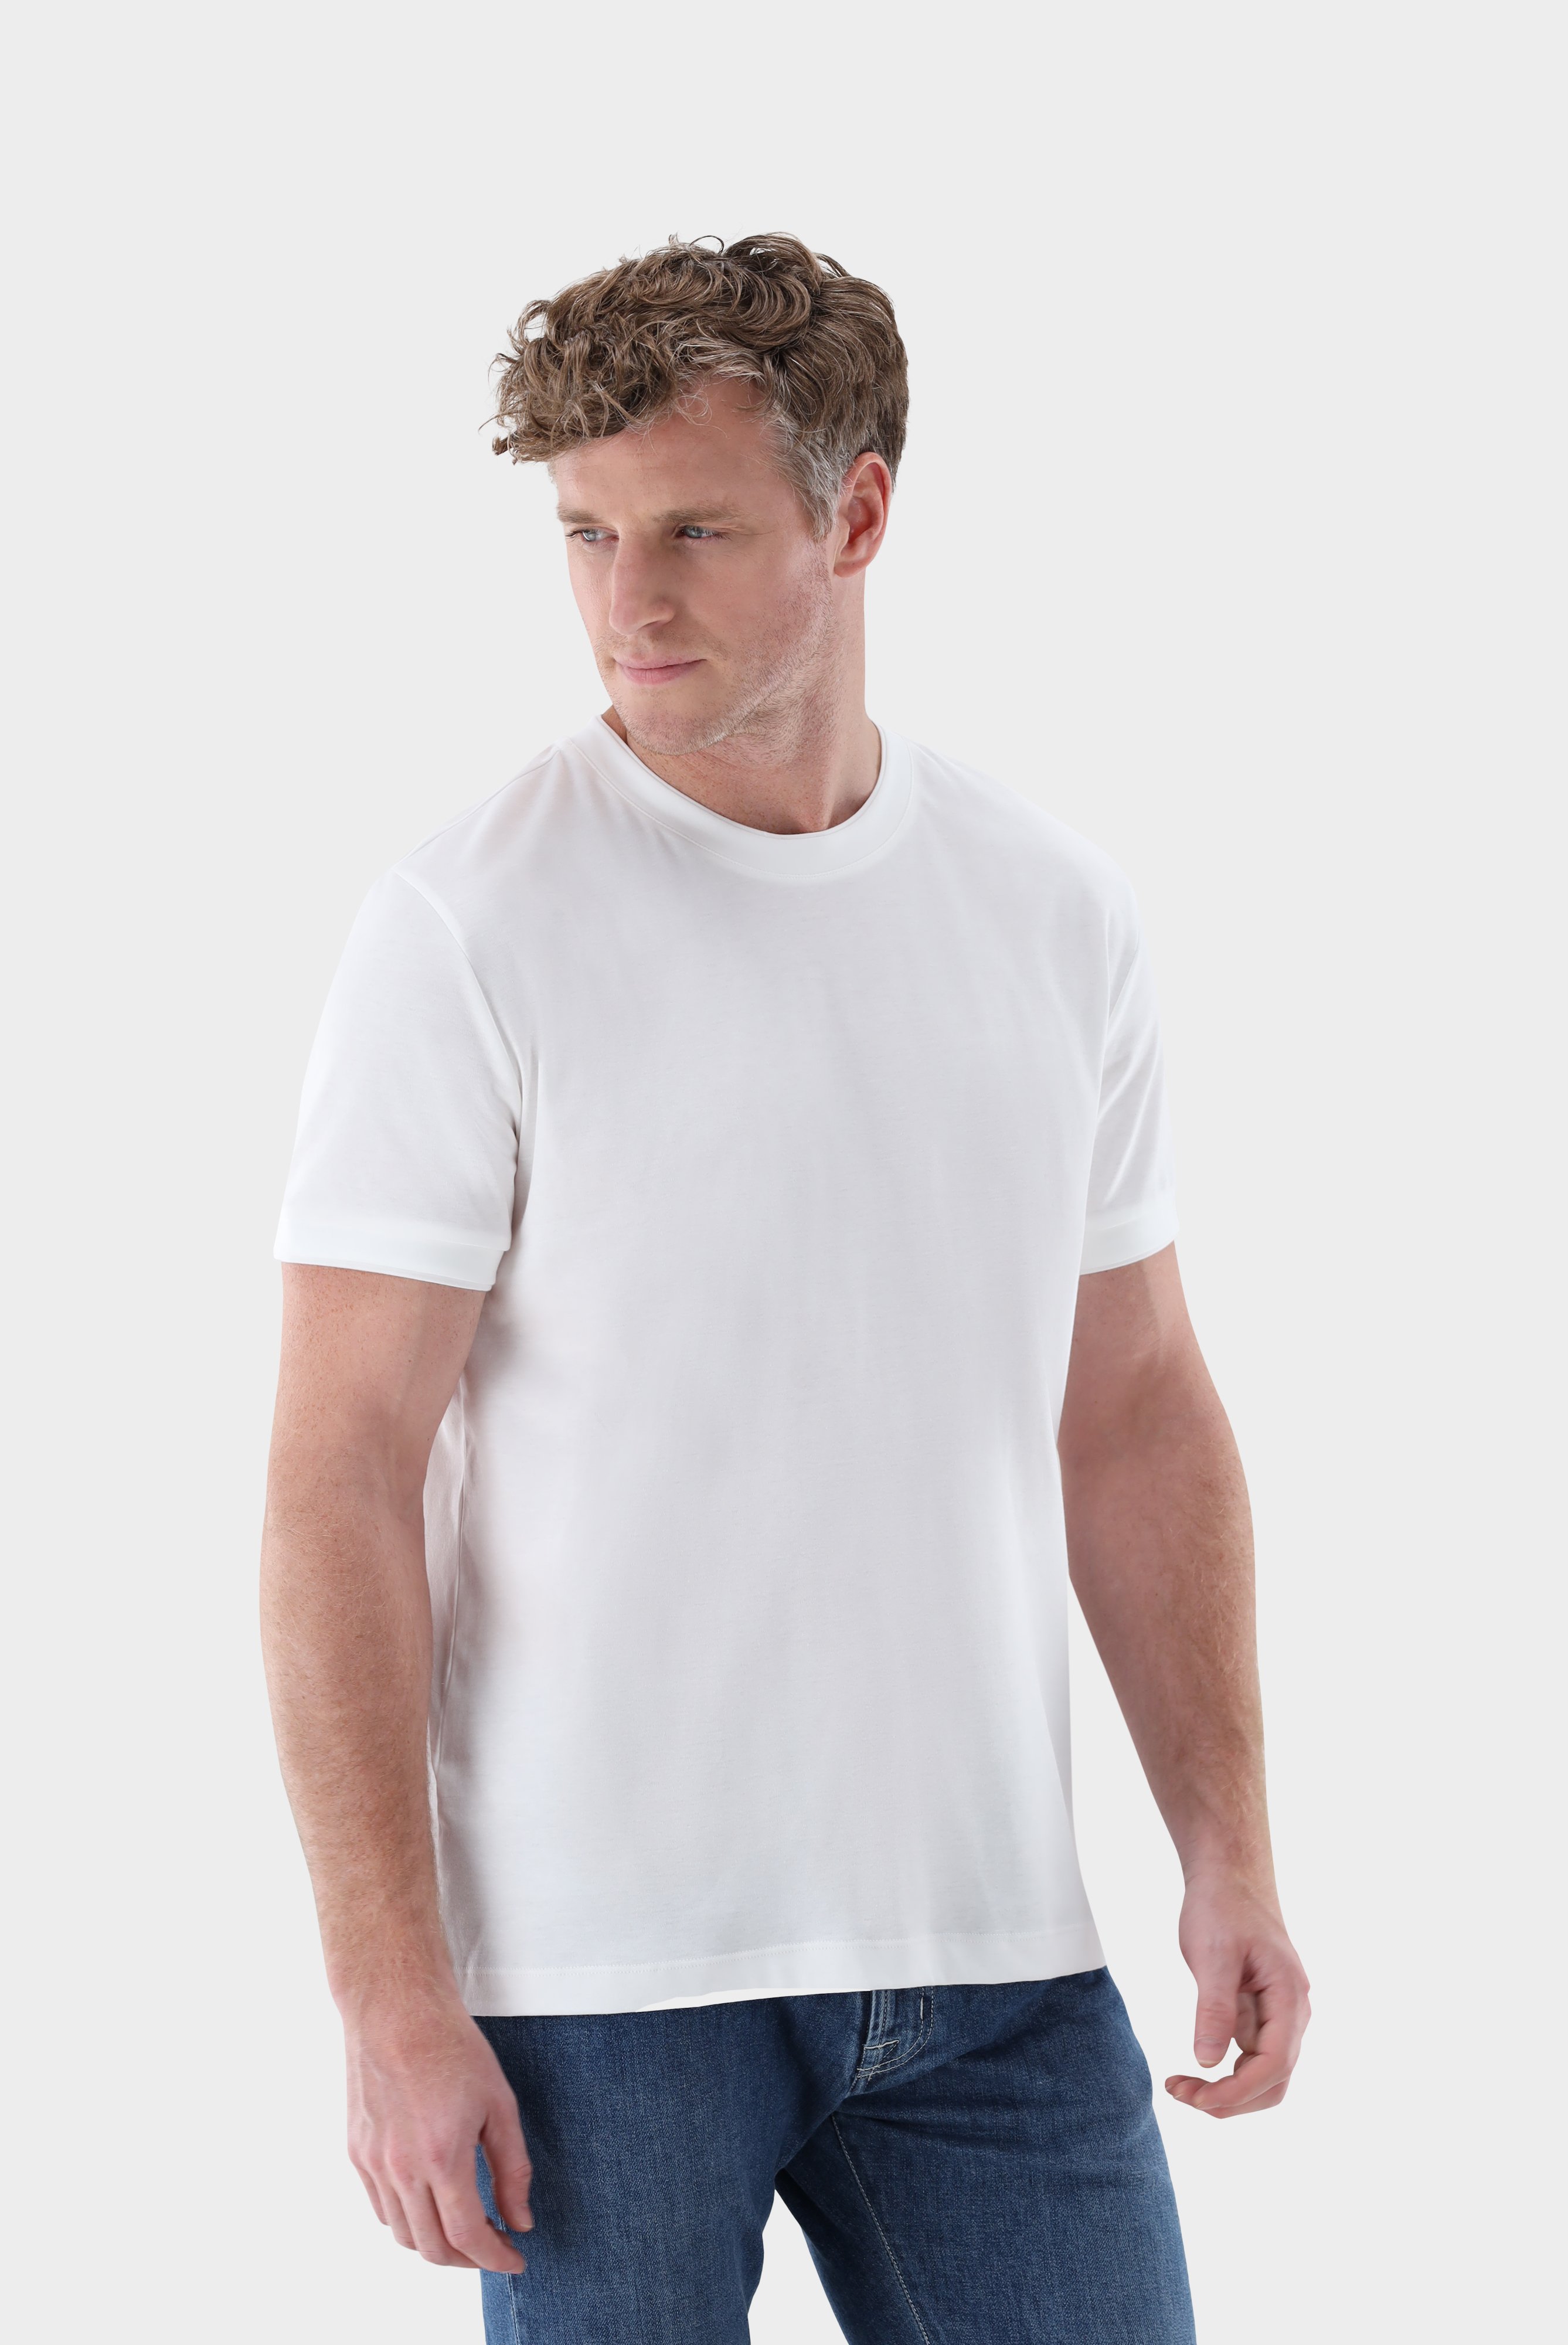 T-Shirts+T-shirt with piping details+20.1673.U2.180053.000.S